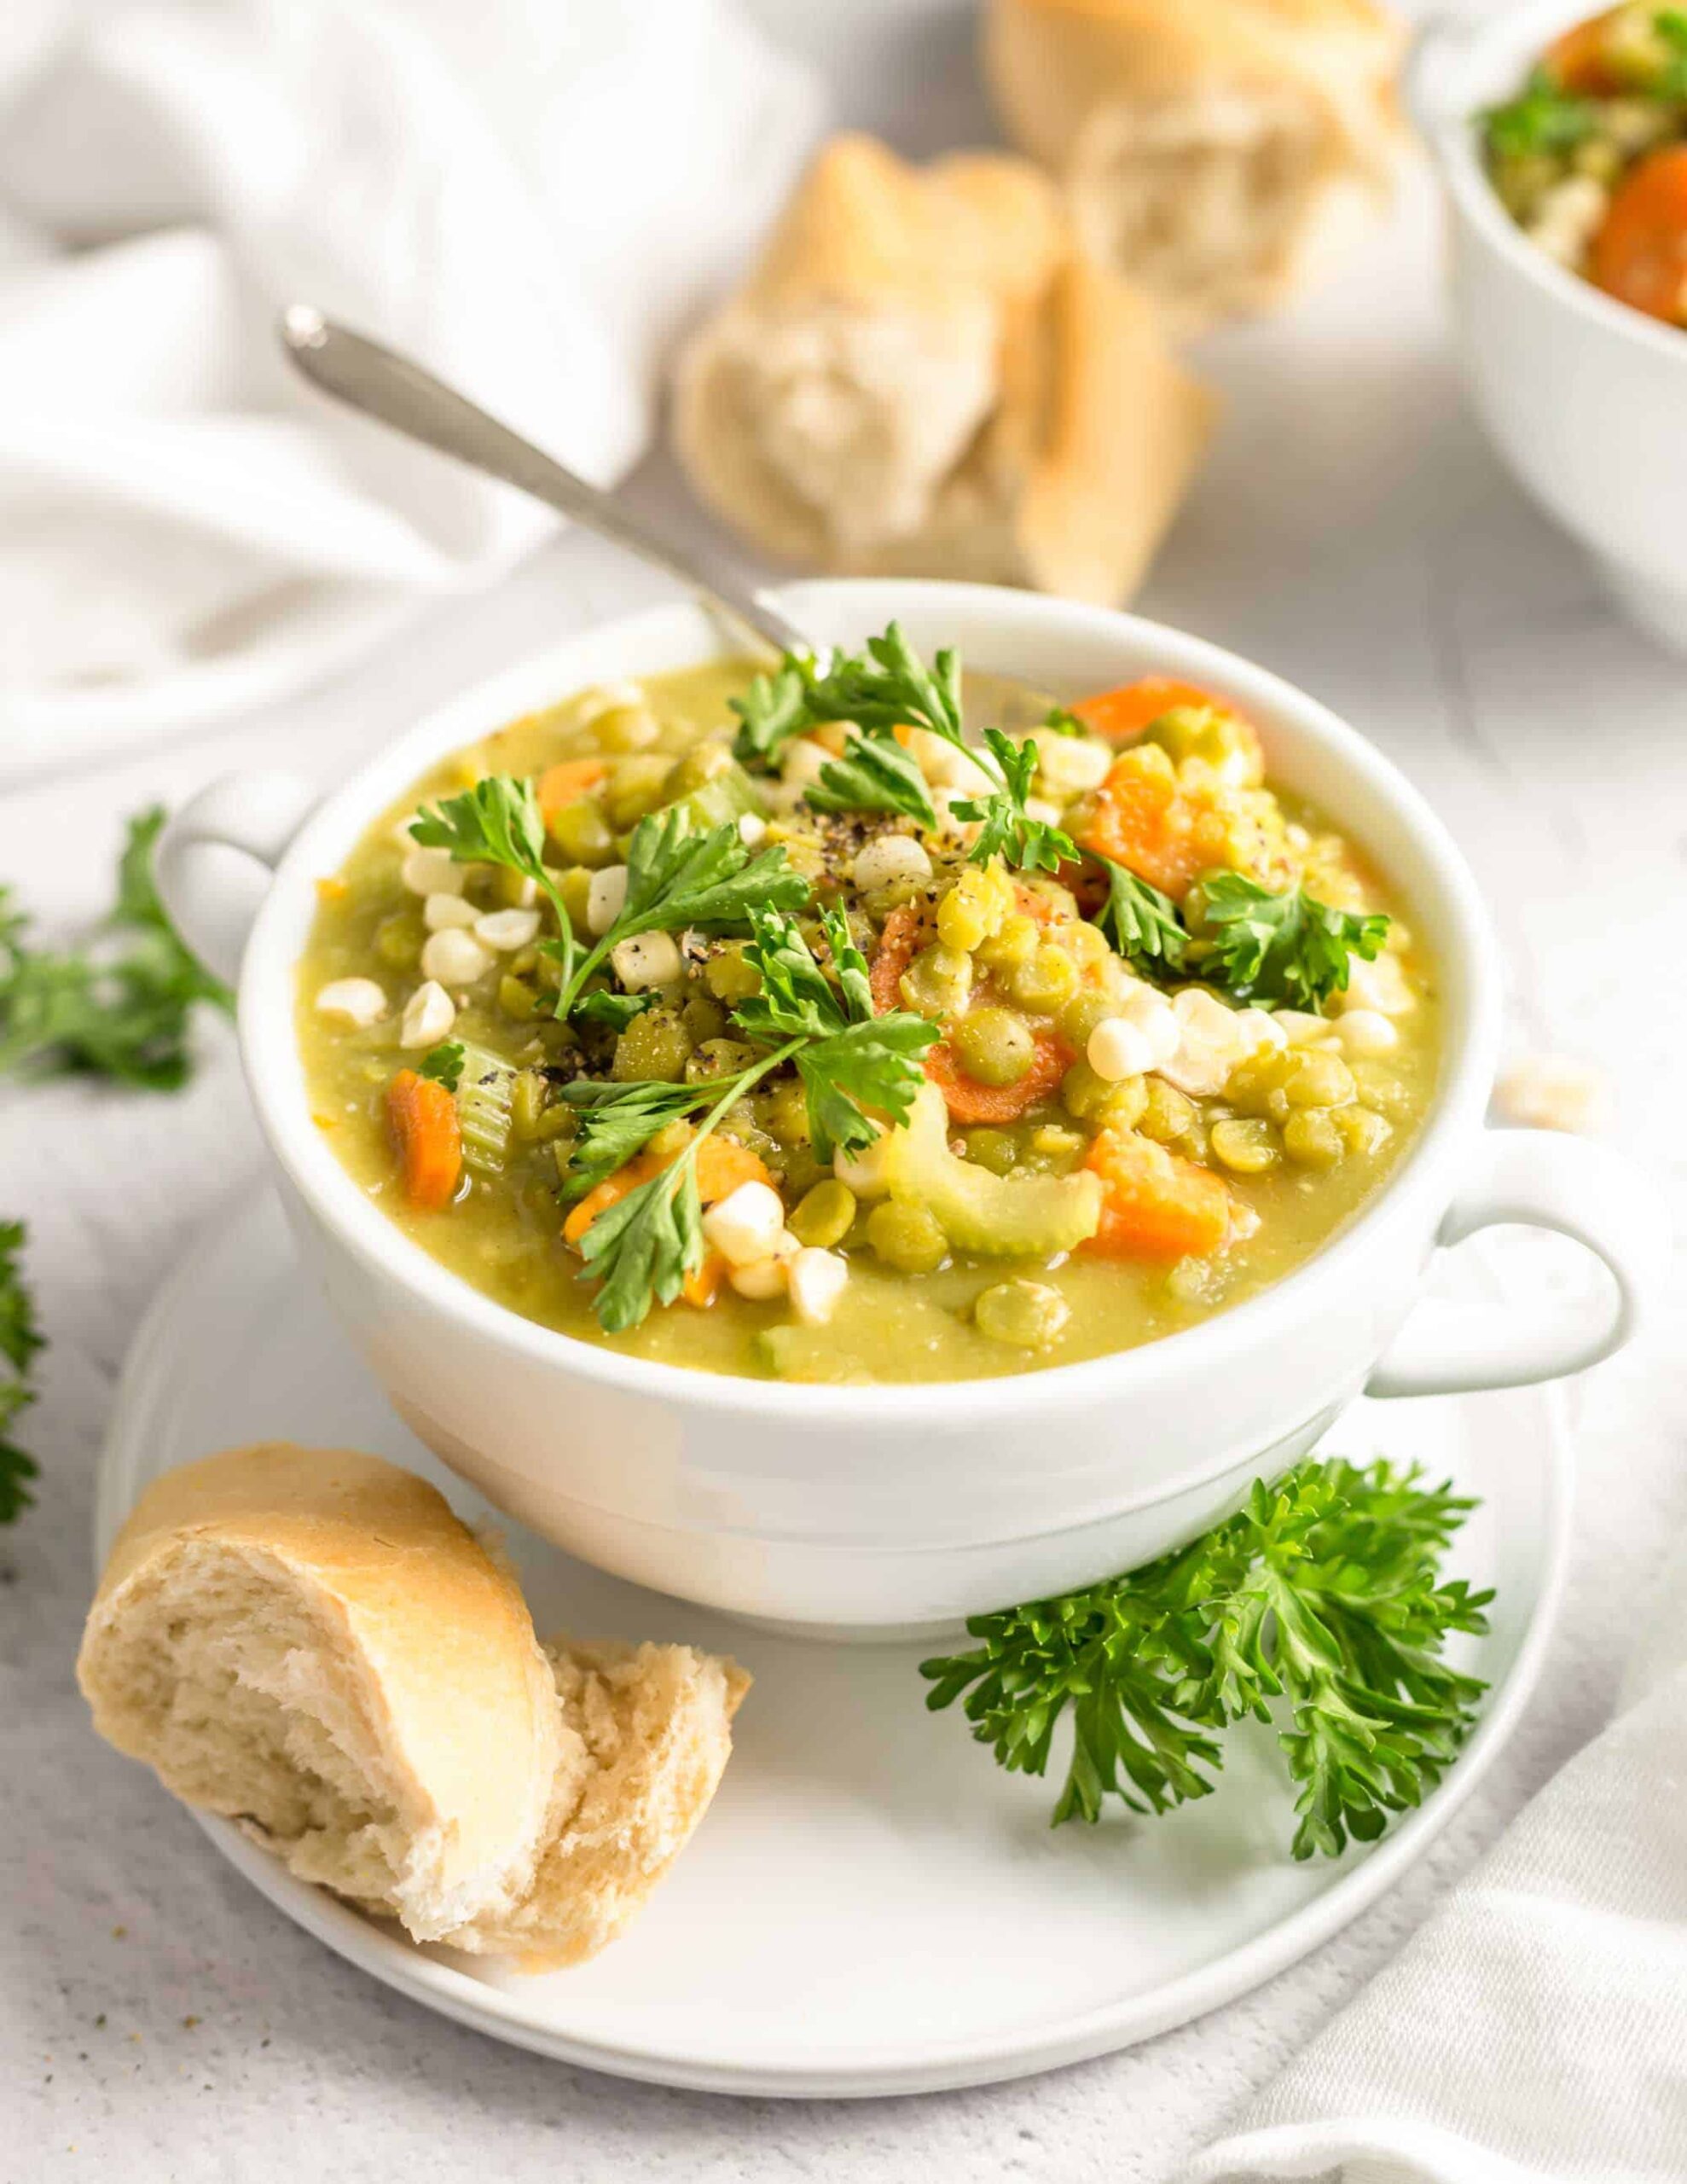 Plant Based Split Pea and Sweet Potato Stew Recipe Sserved in a Bowl With a Side of Rustic Bread